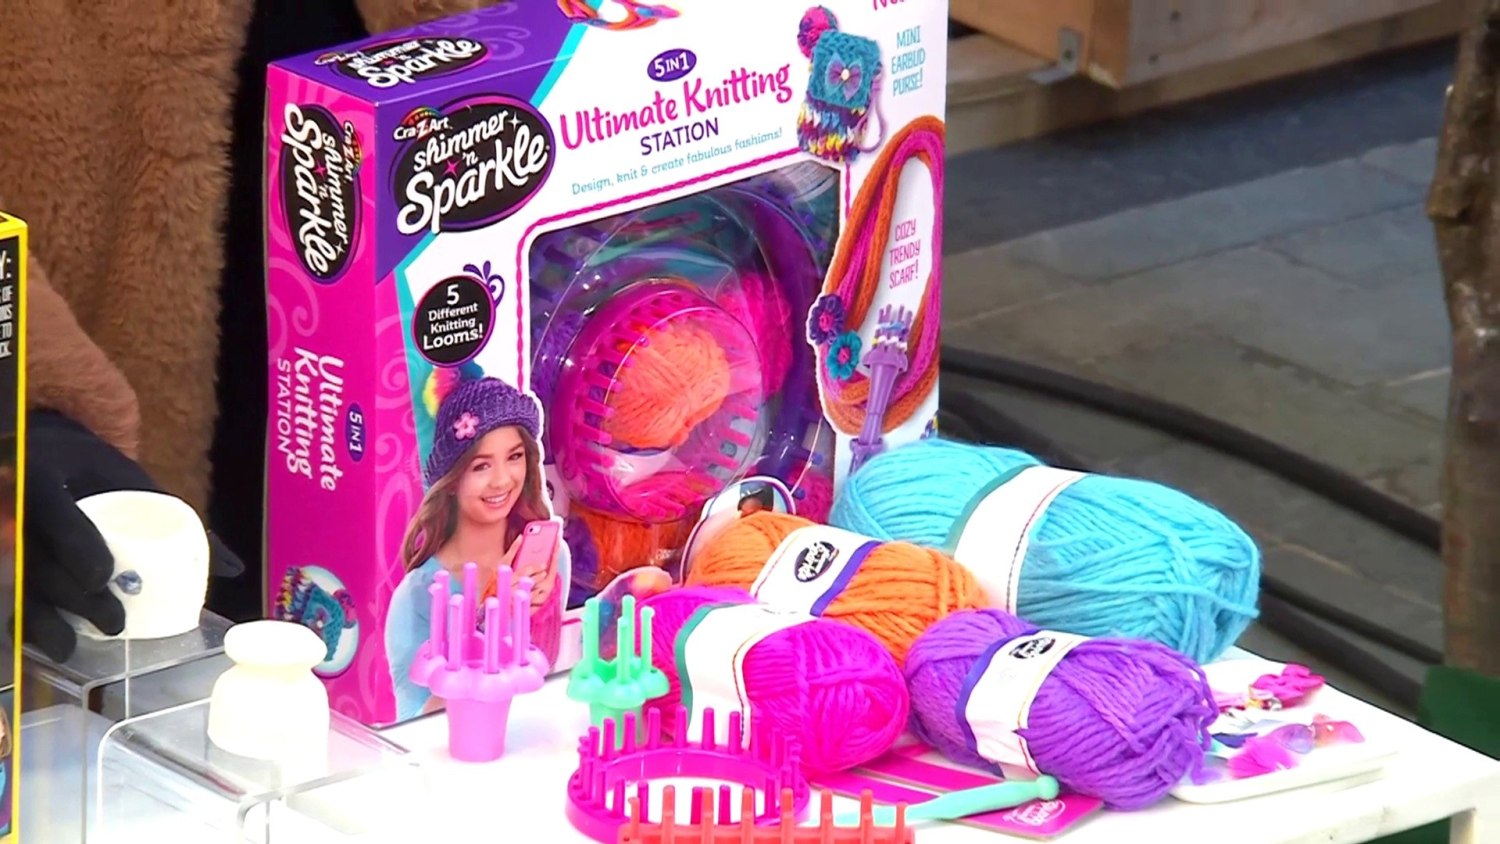 SHIMMER 'N SPARKLE 5-IN-1 ULTIMATE KNITTING STATION - The Toy Insider